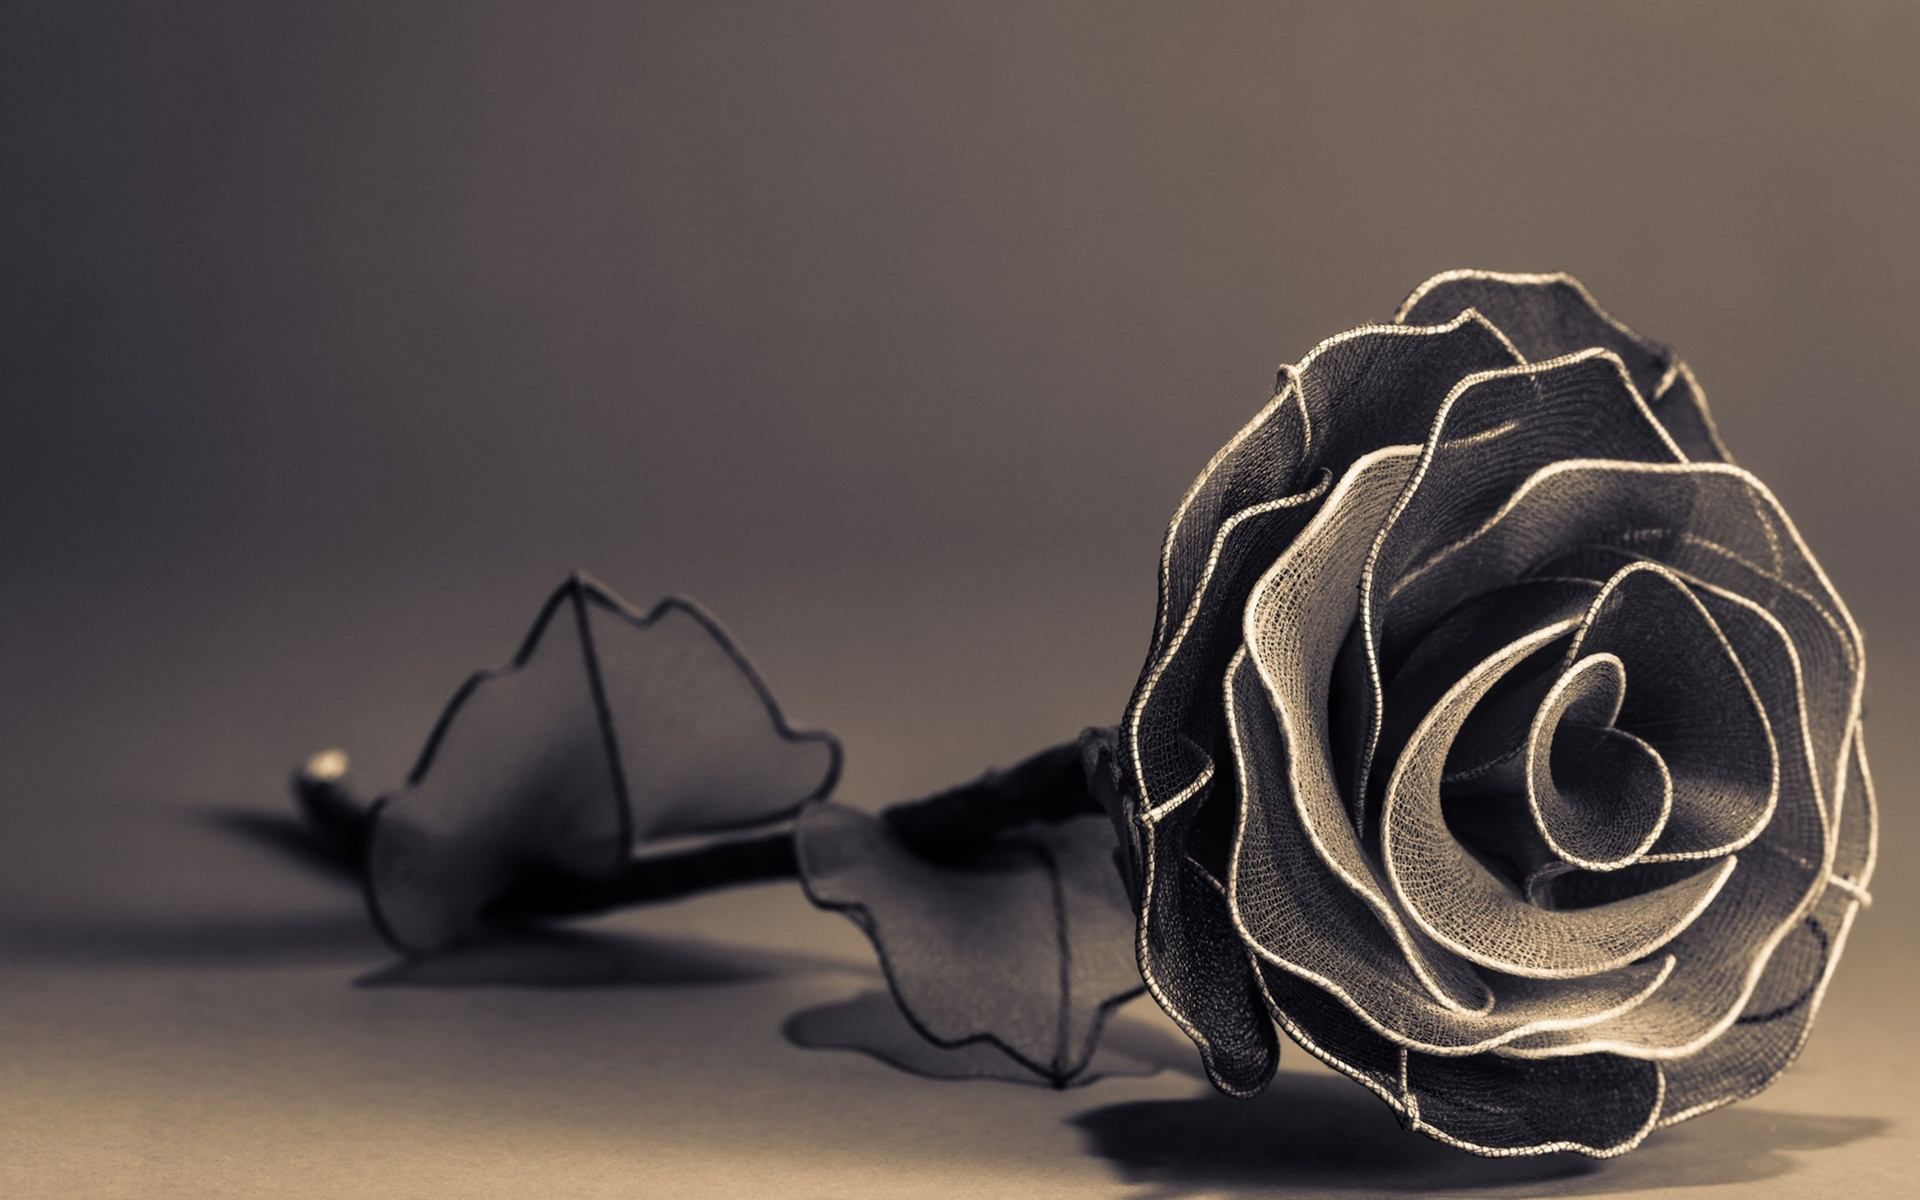 General 1920x1200 photography flowers rose simple background artwork depth of field monochrome sepia black rose